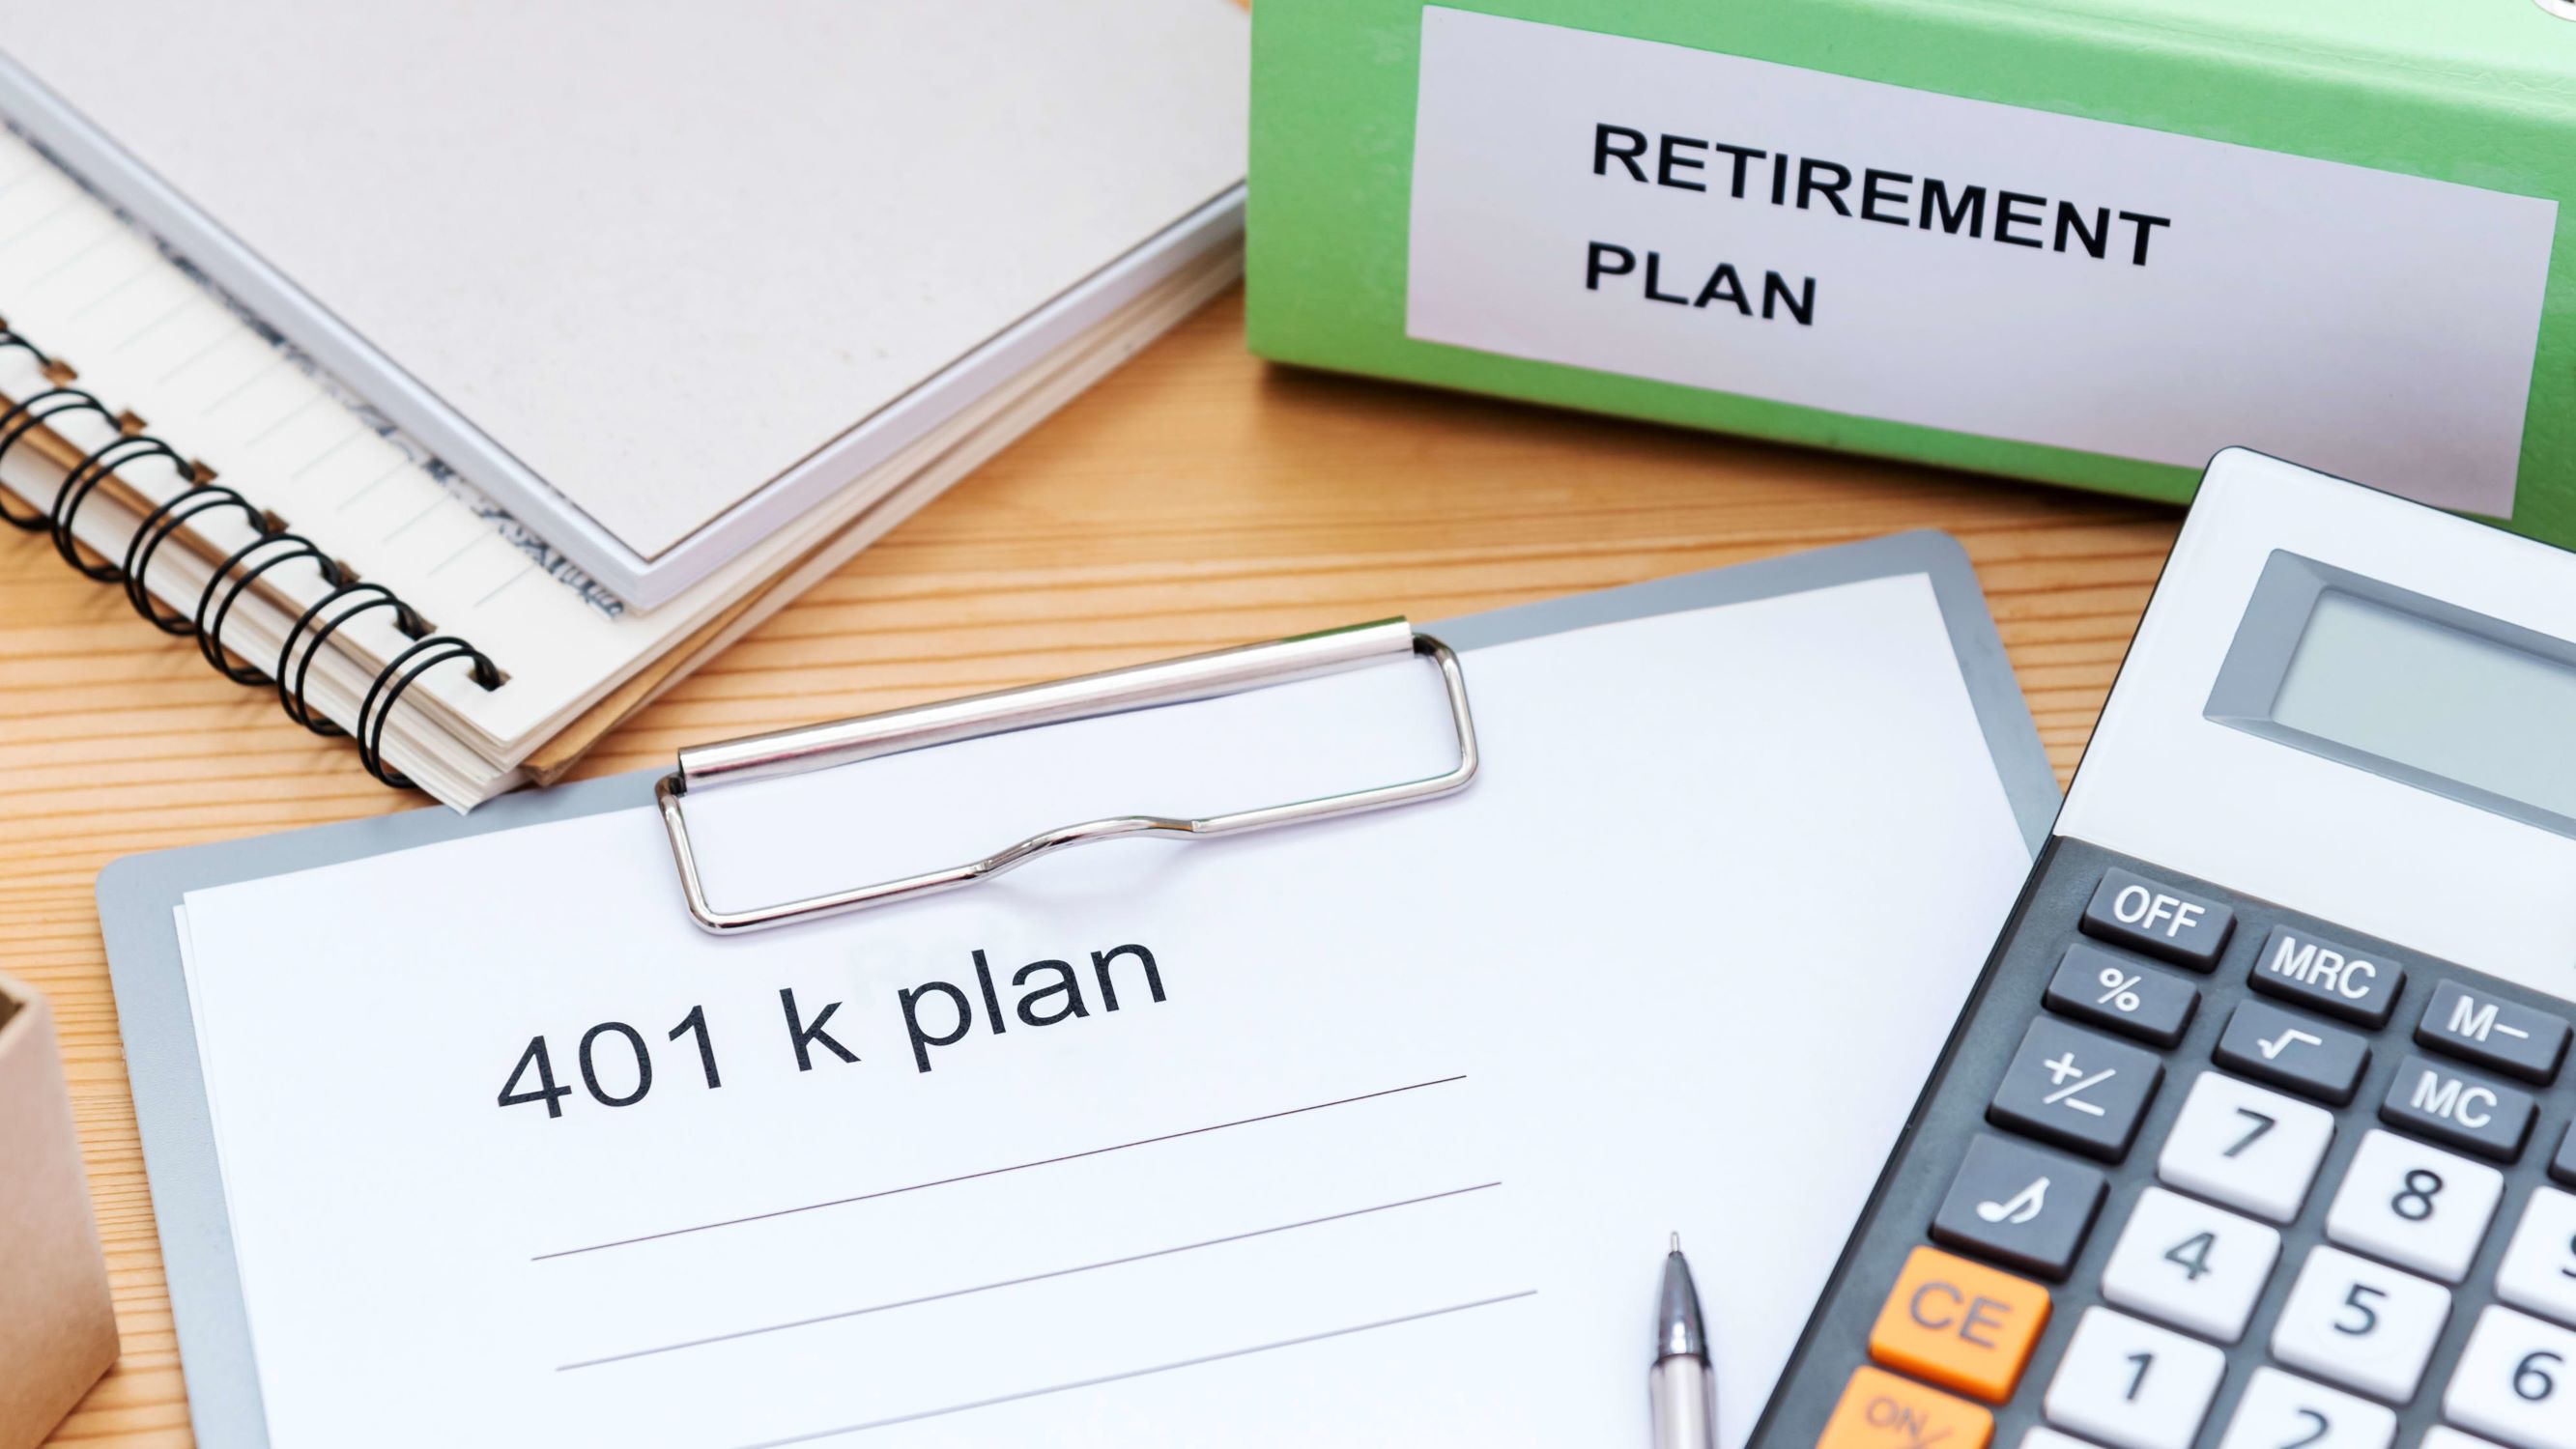 Who Is The Custodian Of A 401K Plan